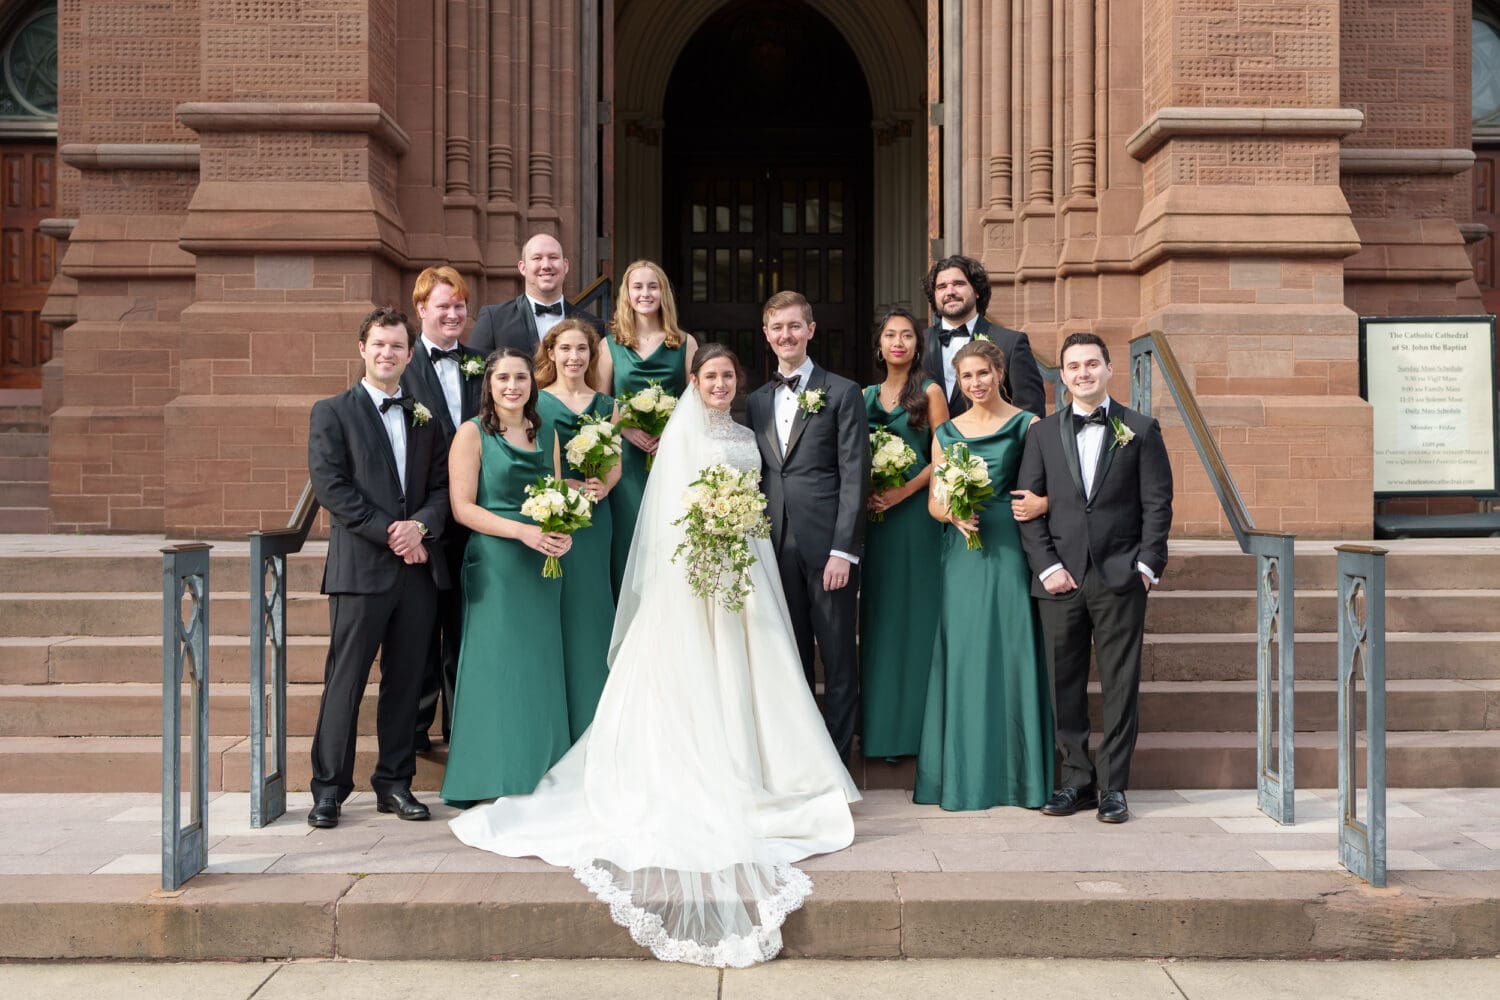 Bridal party picture in front of the cathedral - Cathedral of Saint John Charleston